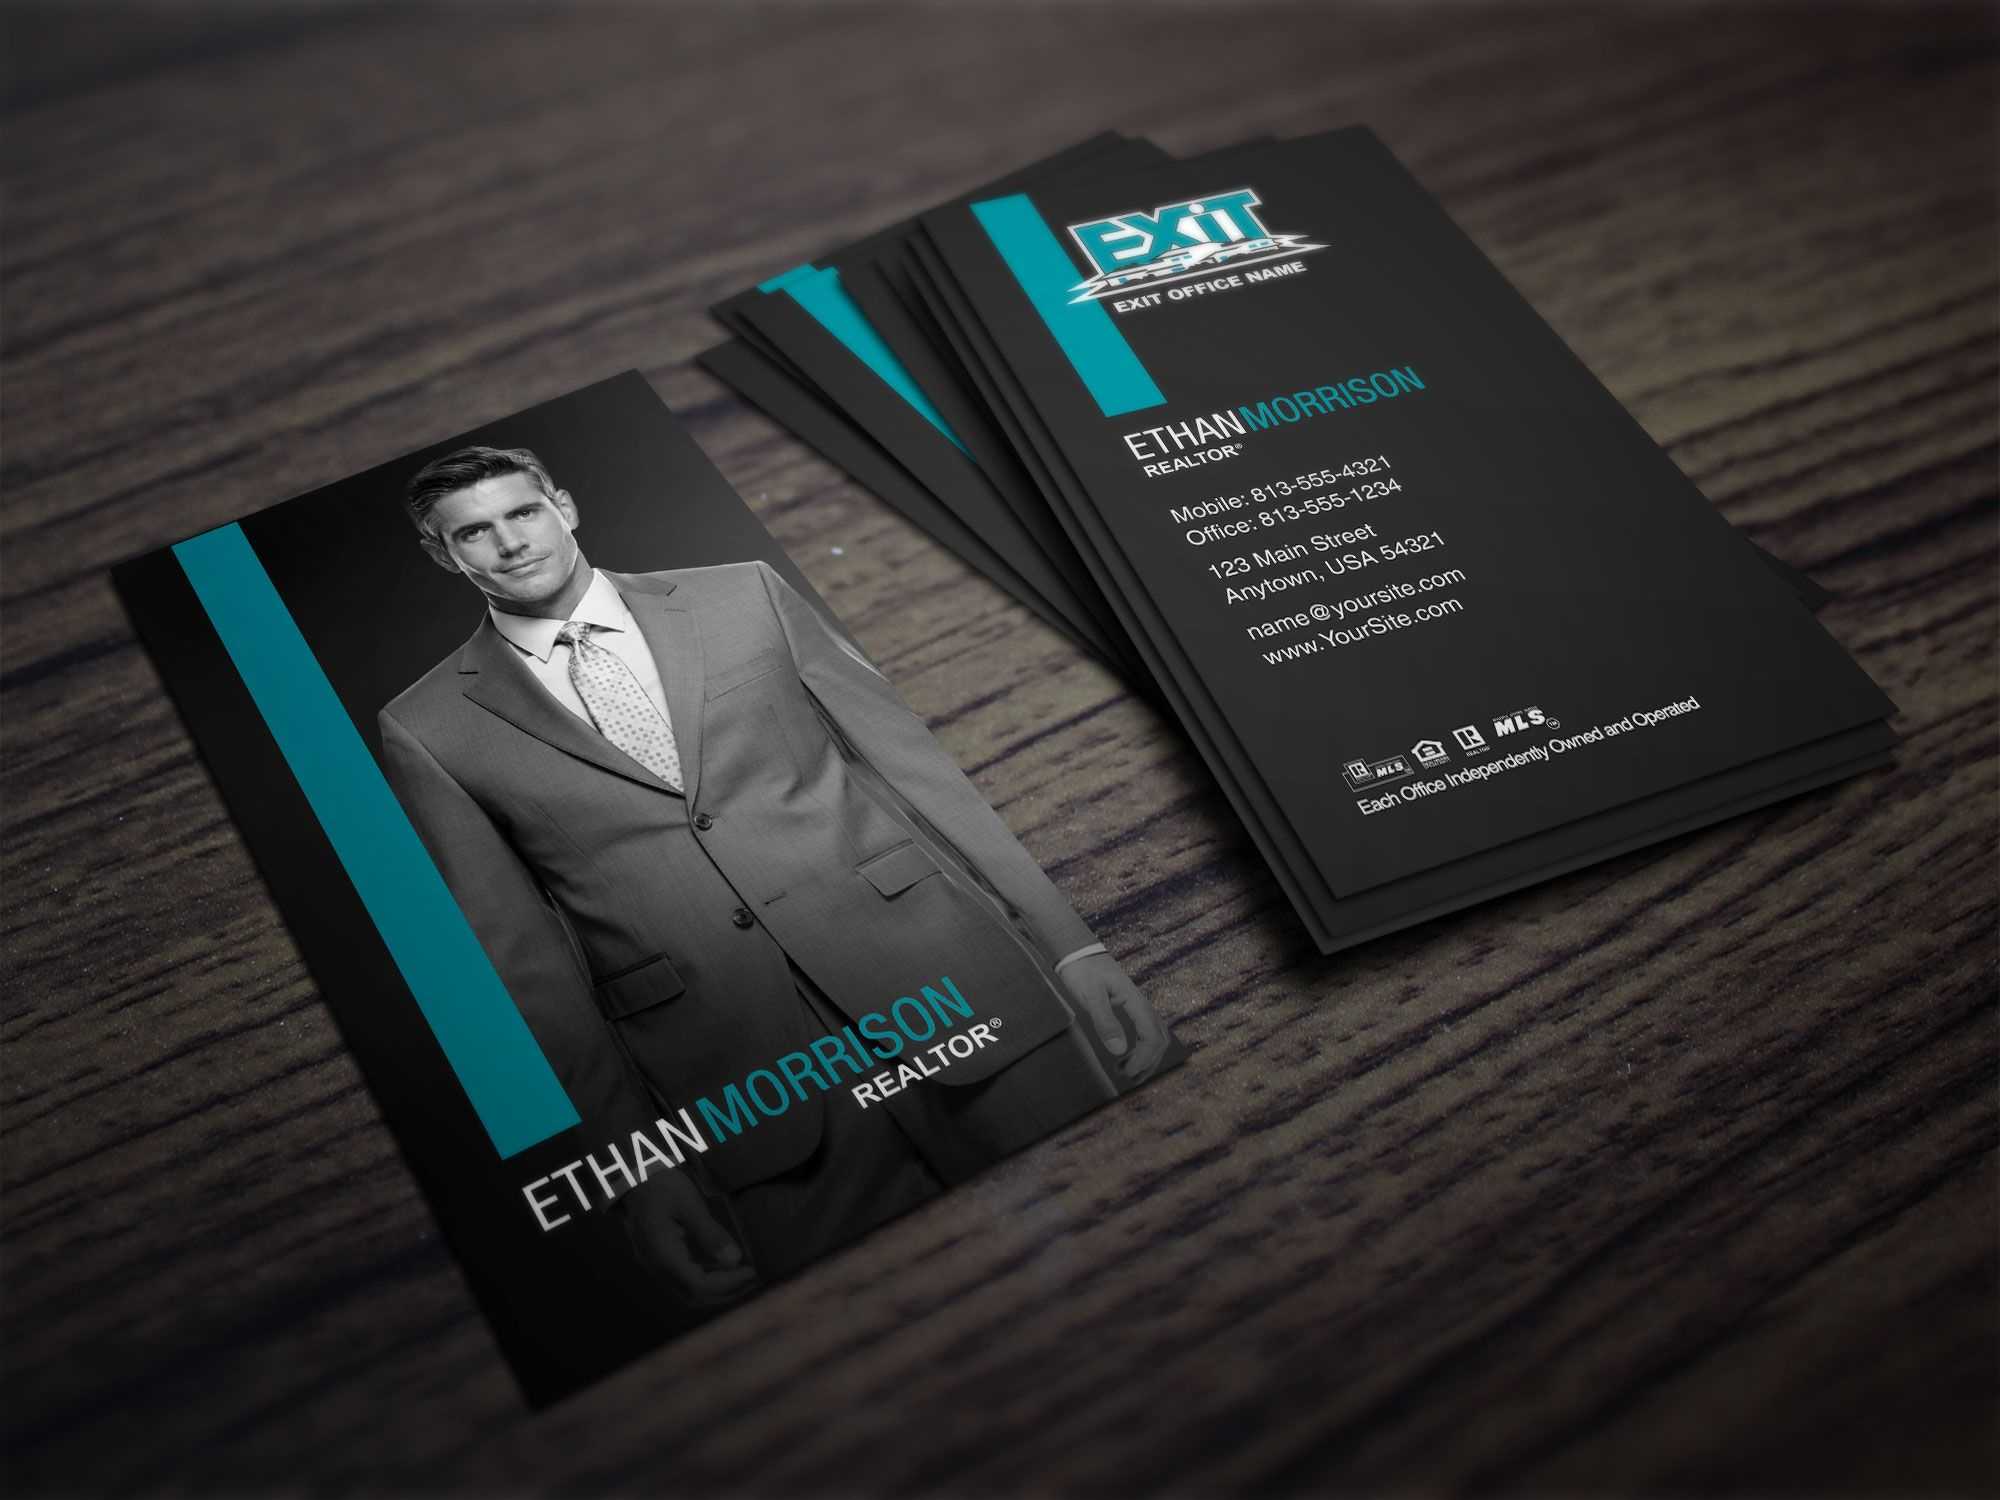 Clean, Dark Exit Realty Business Card Design For Realtors Inside Real Estate Agent Business Card Template